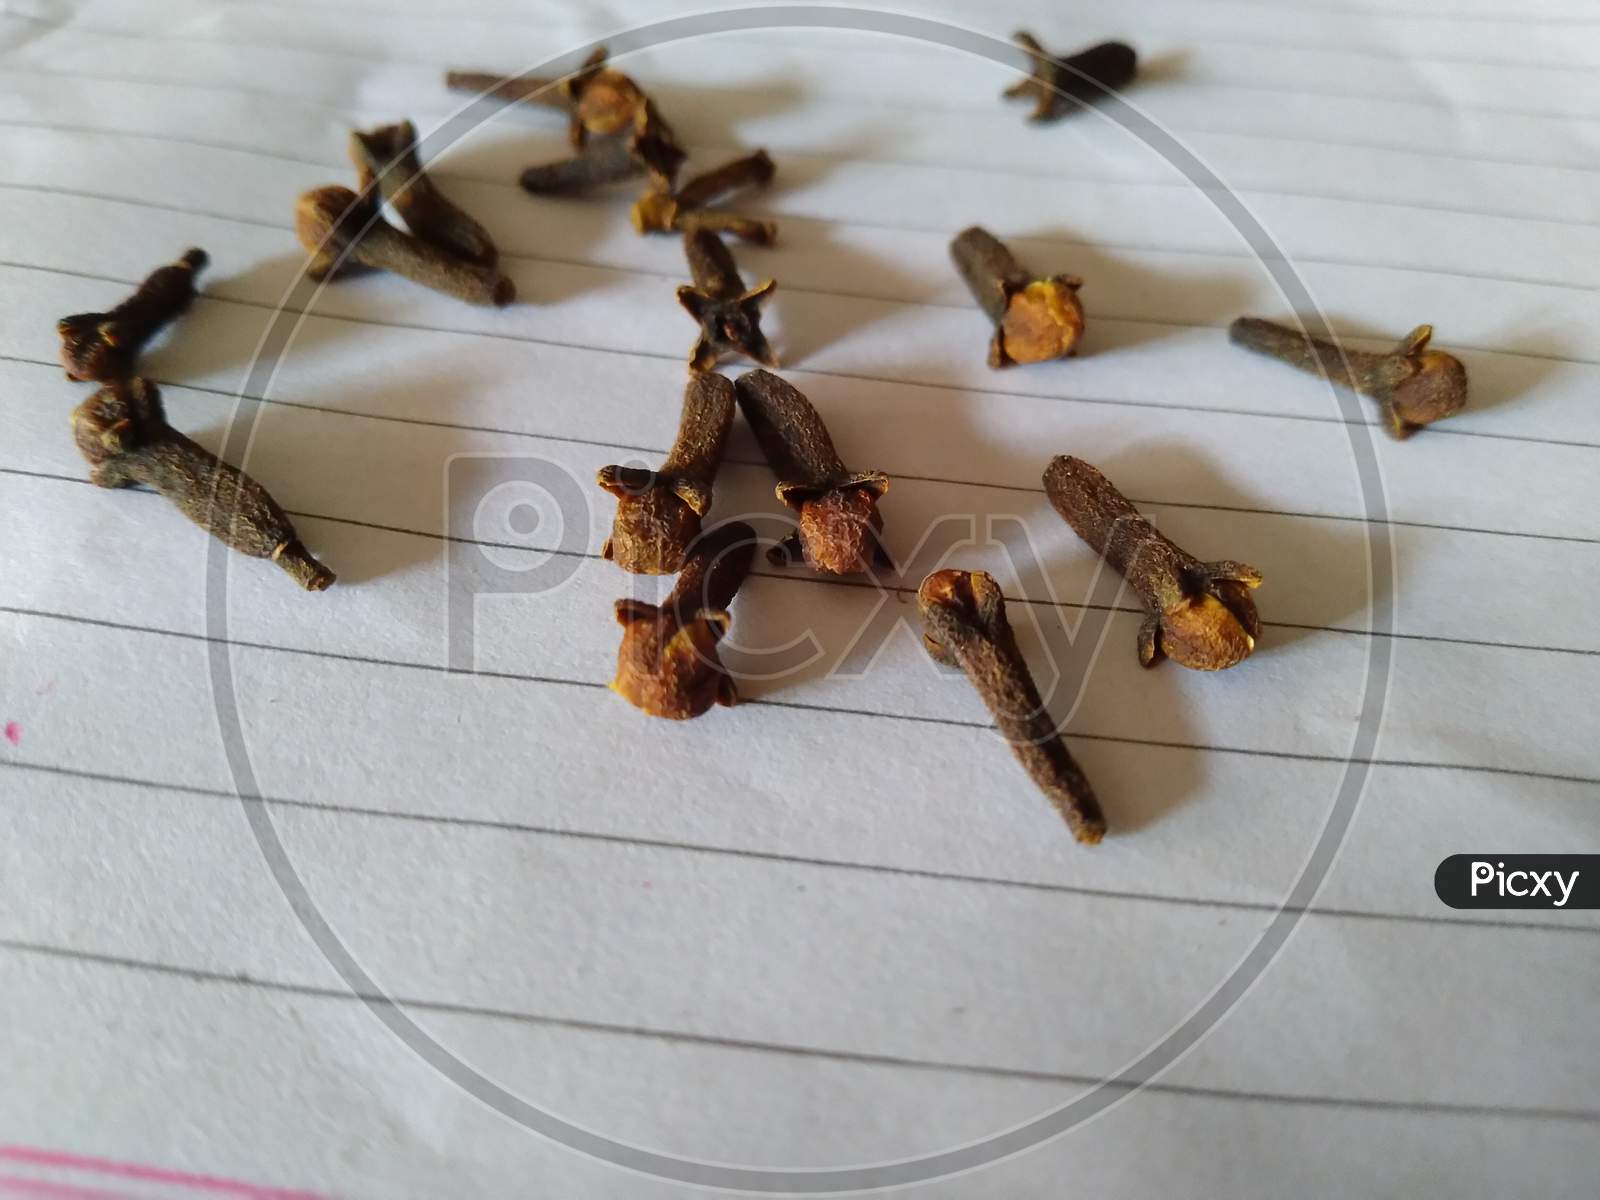 Close-up image of cloves on a book paper. Selectively focused